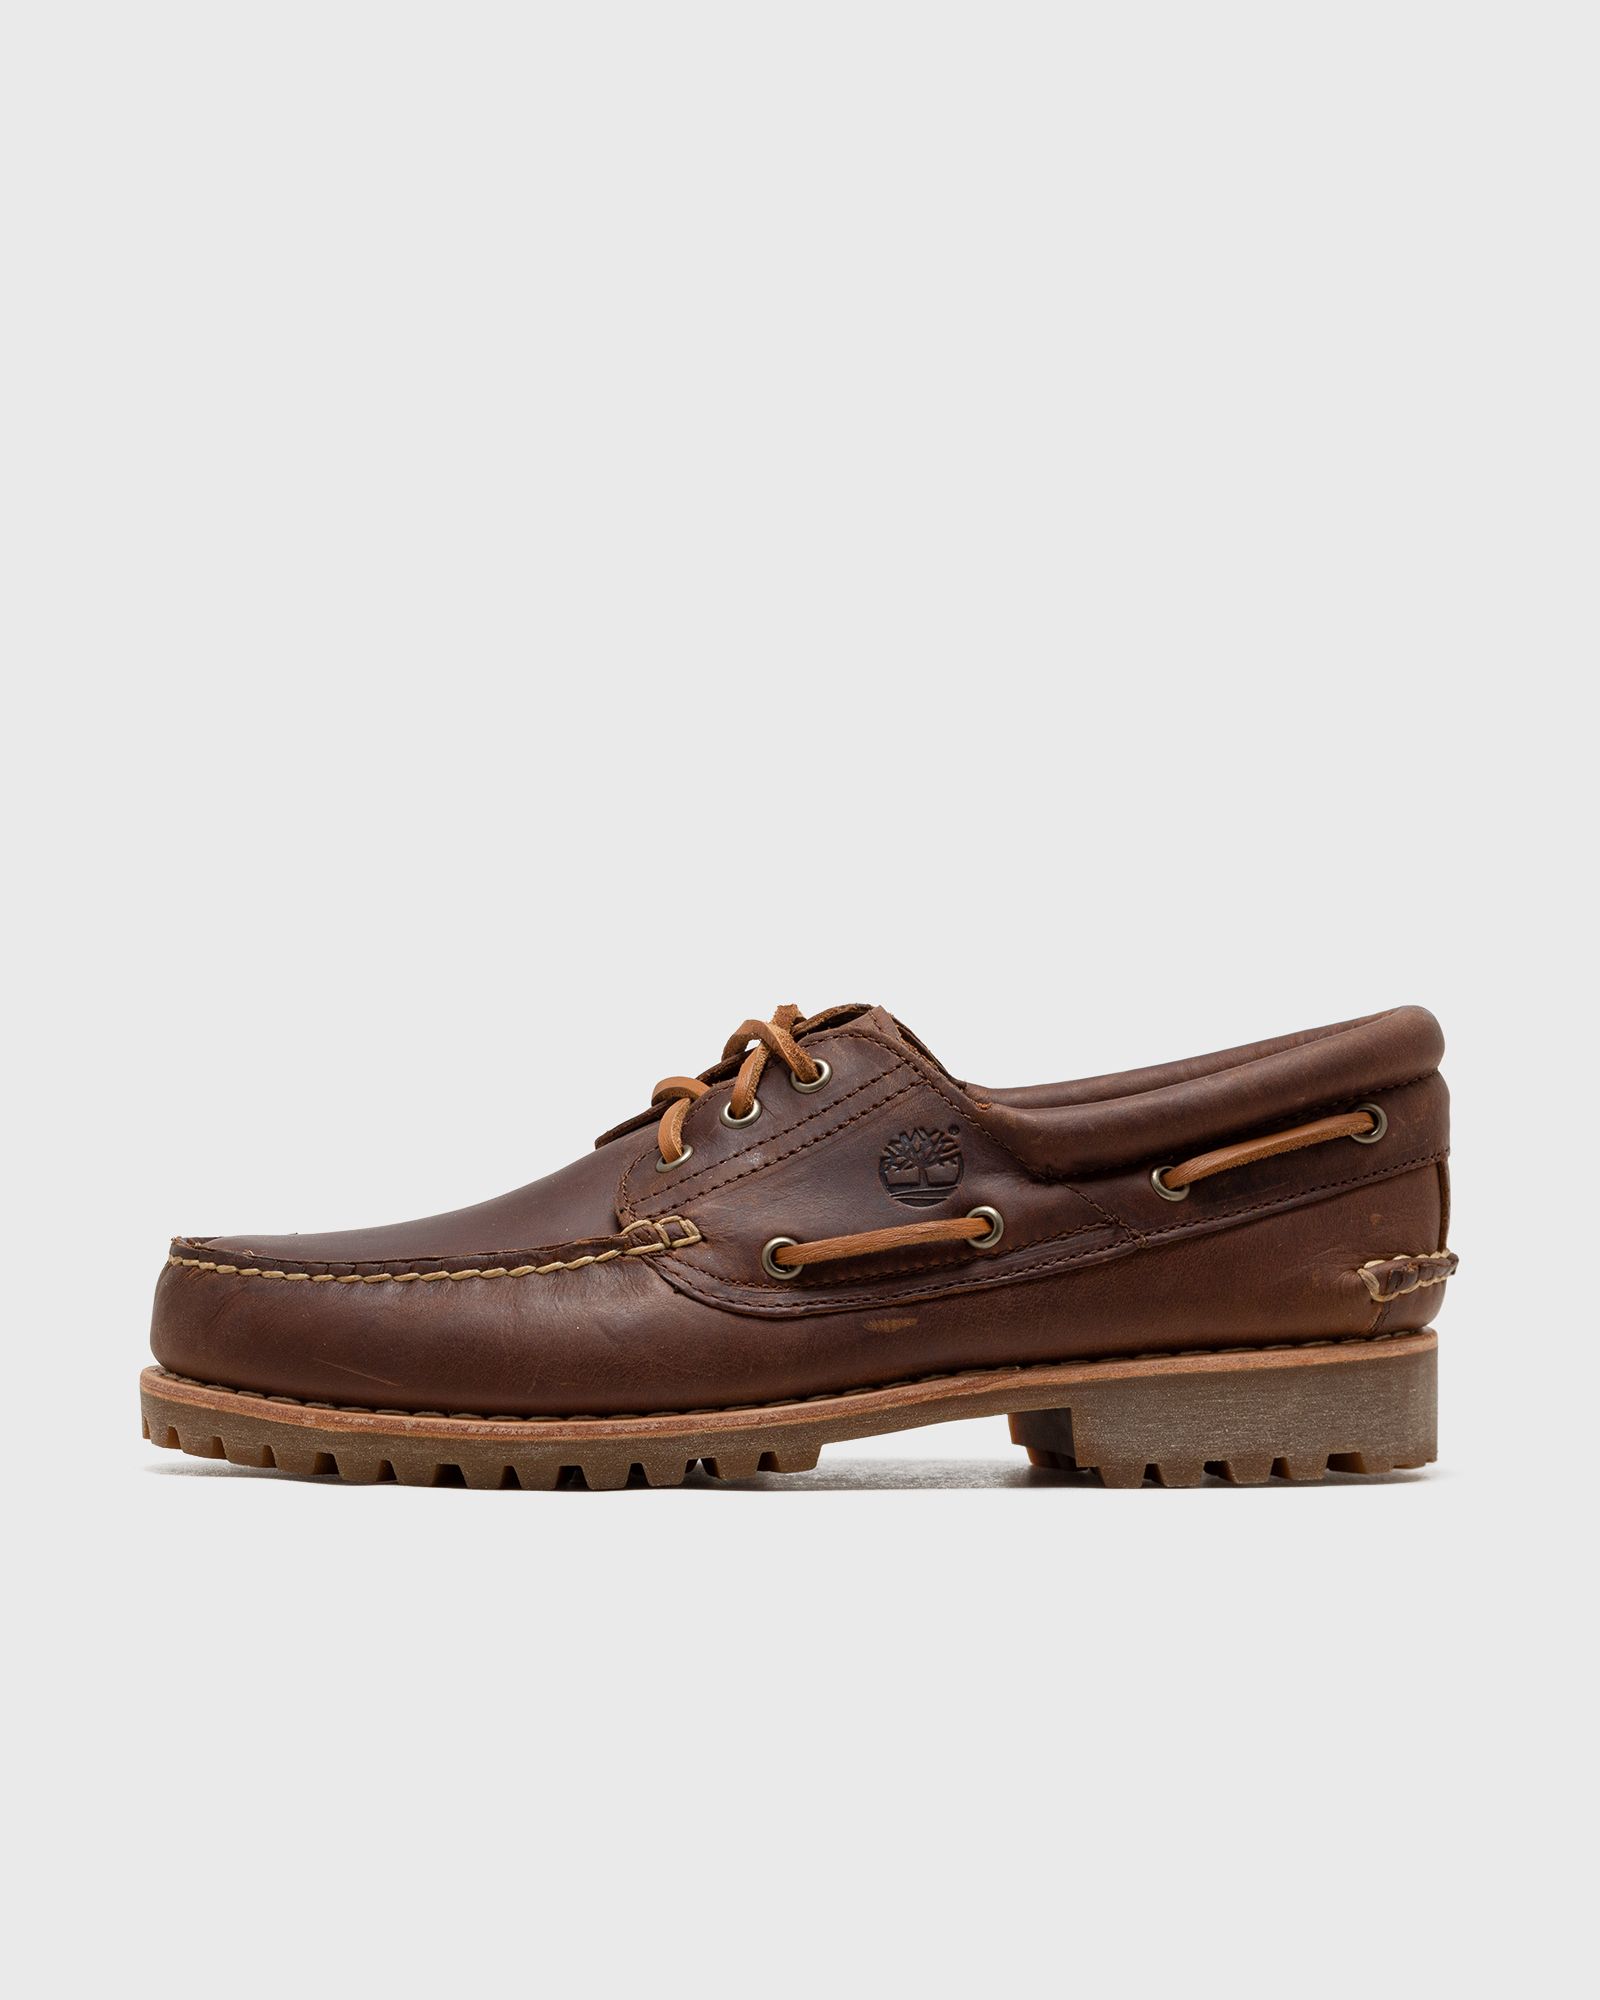 Timberland - authentics 3 eye classic lug men casual shoes brown in größe:41